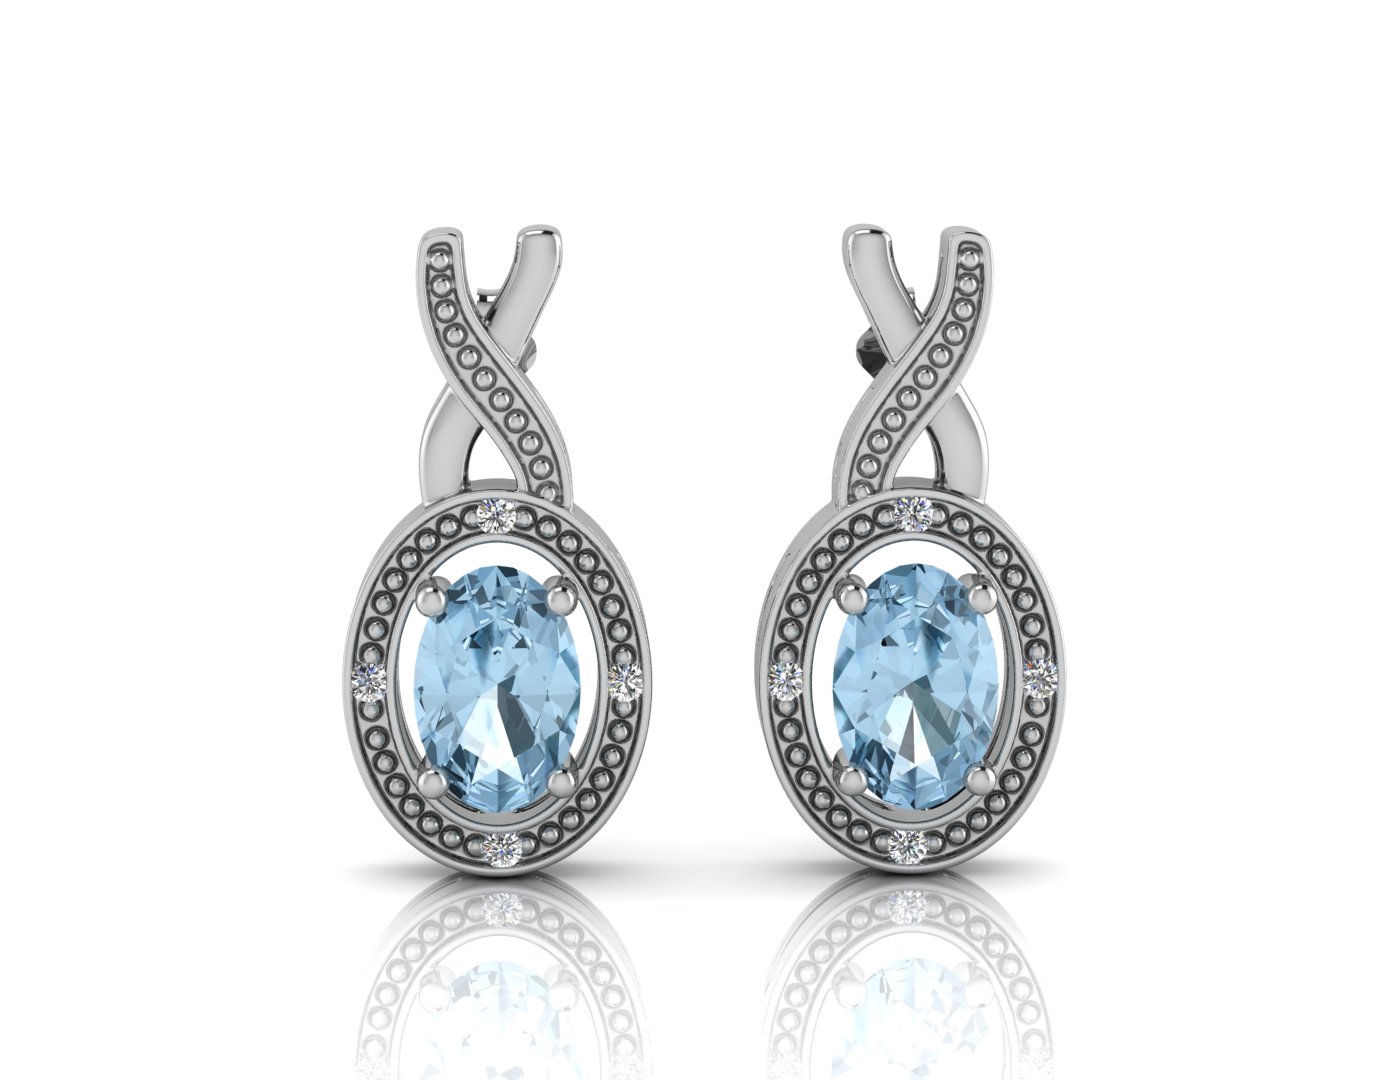 9ct White Gold Diamond and Blue Topaz Earrings - Image 3 of 4